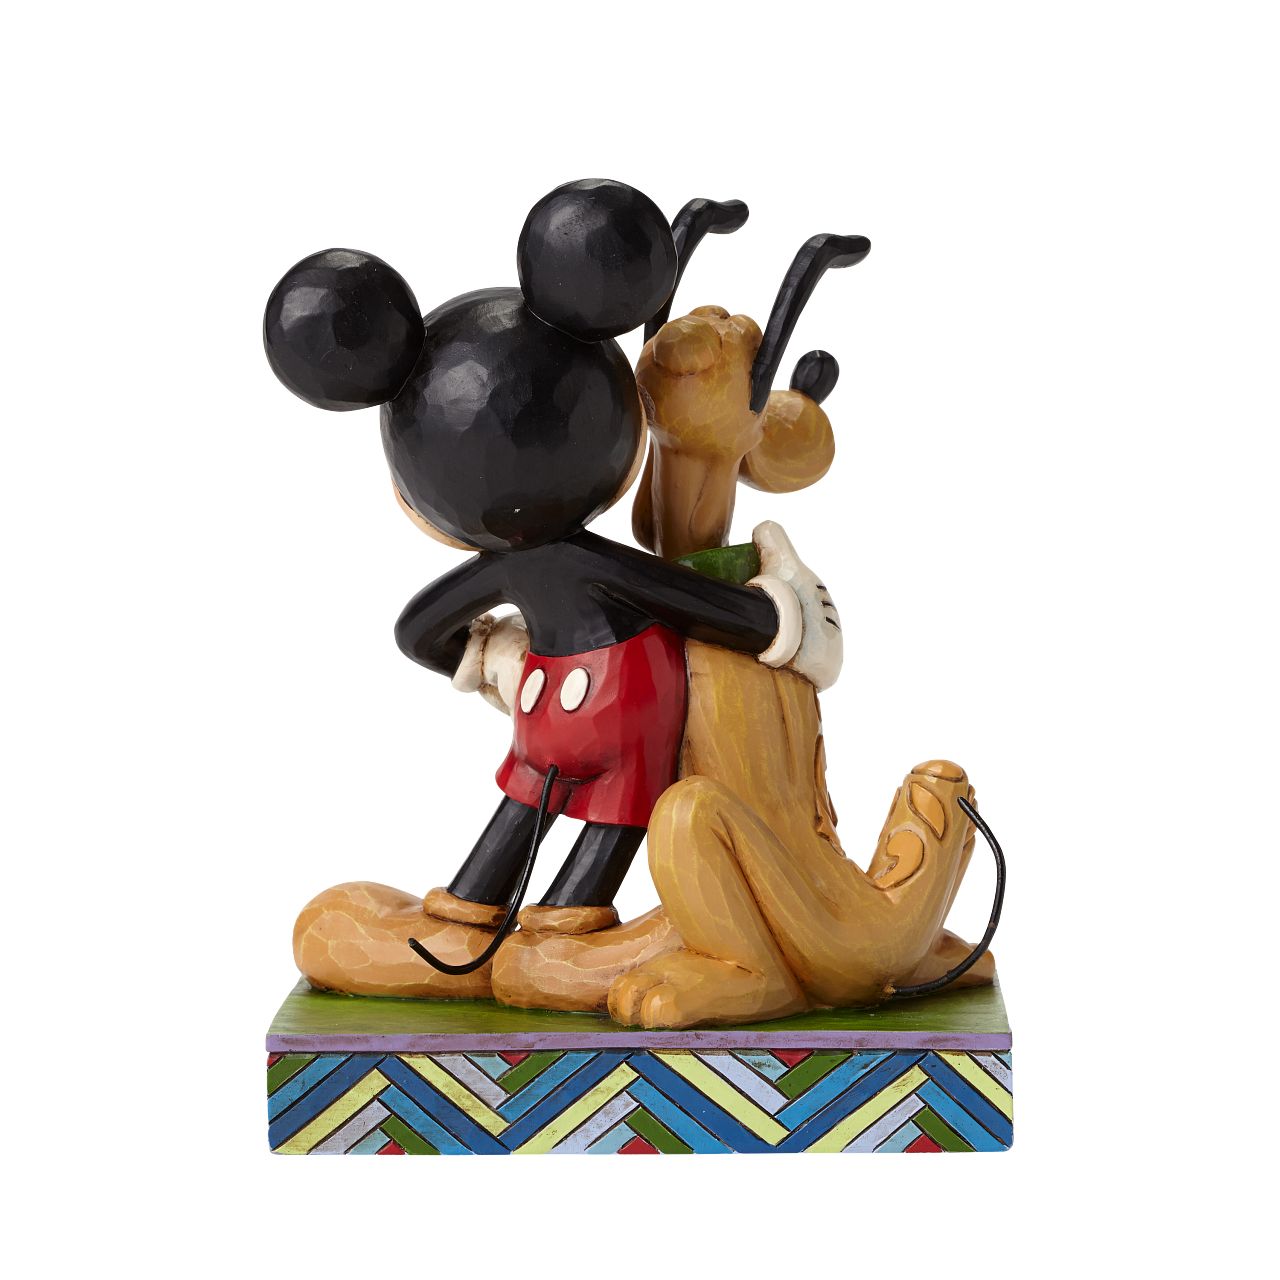 Jim Shore Best Pals - Mickey Mouse & Pluto Figurine  Dogs are a mouse's best friend! This heartfelt figurine celebrates the unconditional love Mickey and Pluto have for each other, as the duo pose with happy smiles and a cuddly stance. Handcrafted and hand-painted, this piece is a one-of-a-kind treasure.